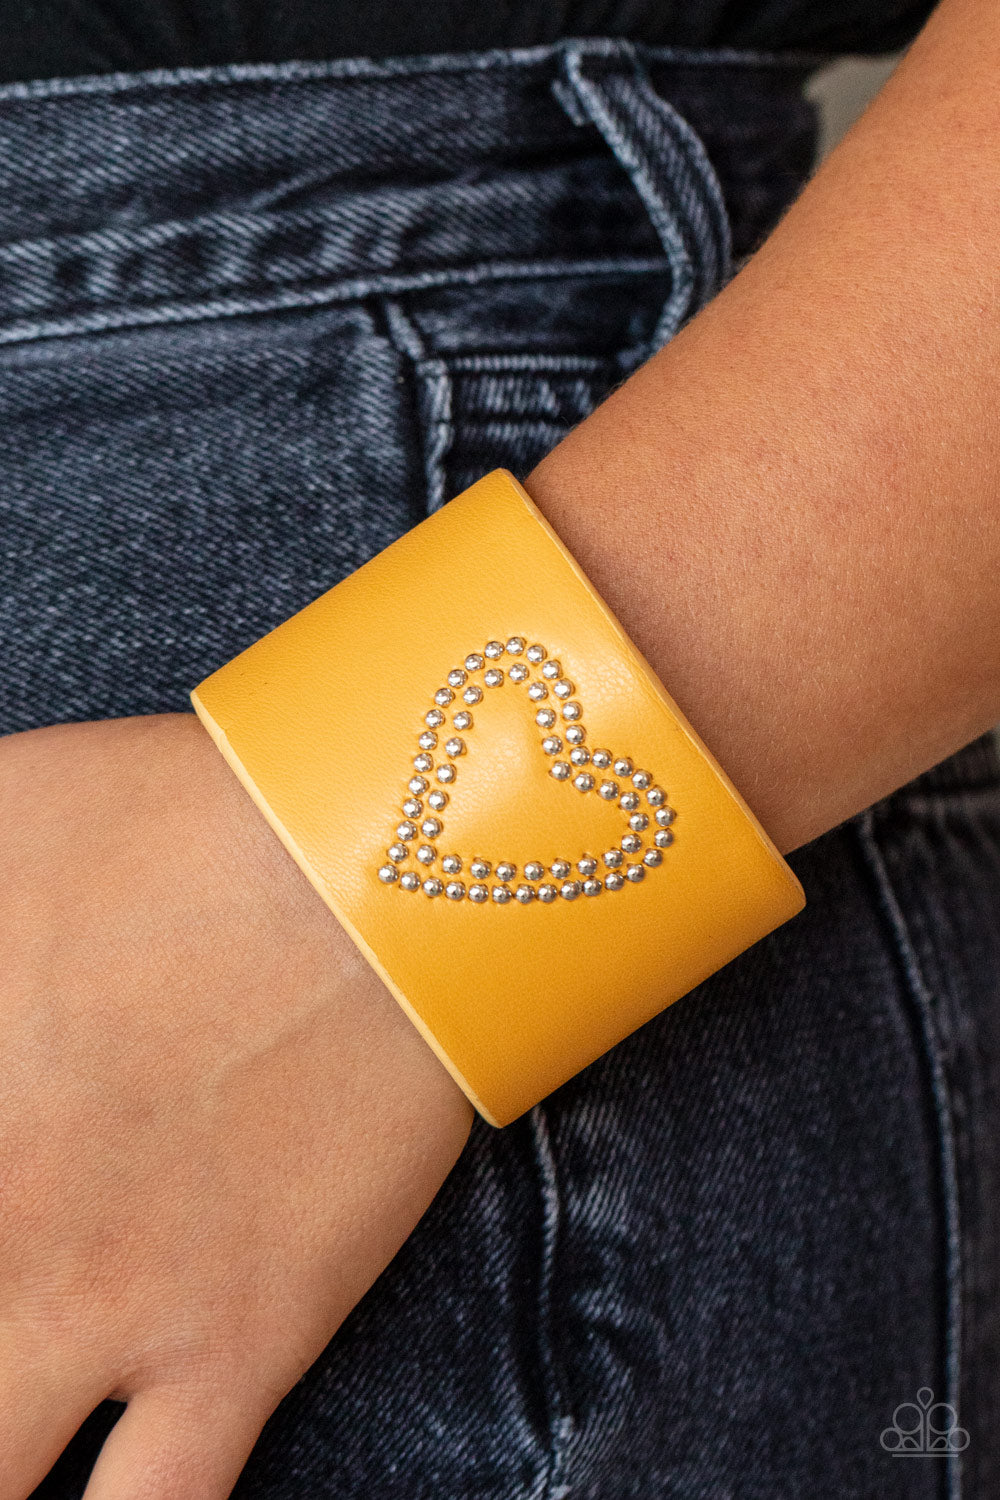 Rodeo Romance - Yellow Leather Heart Cuff Bracelets the center of a yellow leather cuff is studded in a charming heart pattern, creating a rustically romantic look around the wrist.  Sold as one individual bracelet.